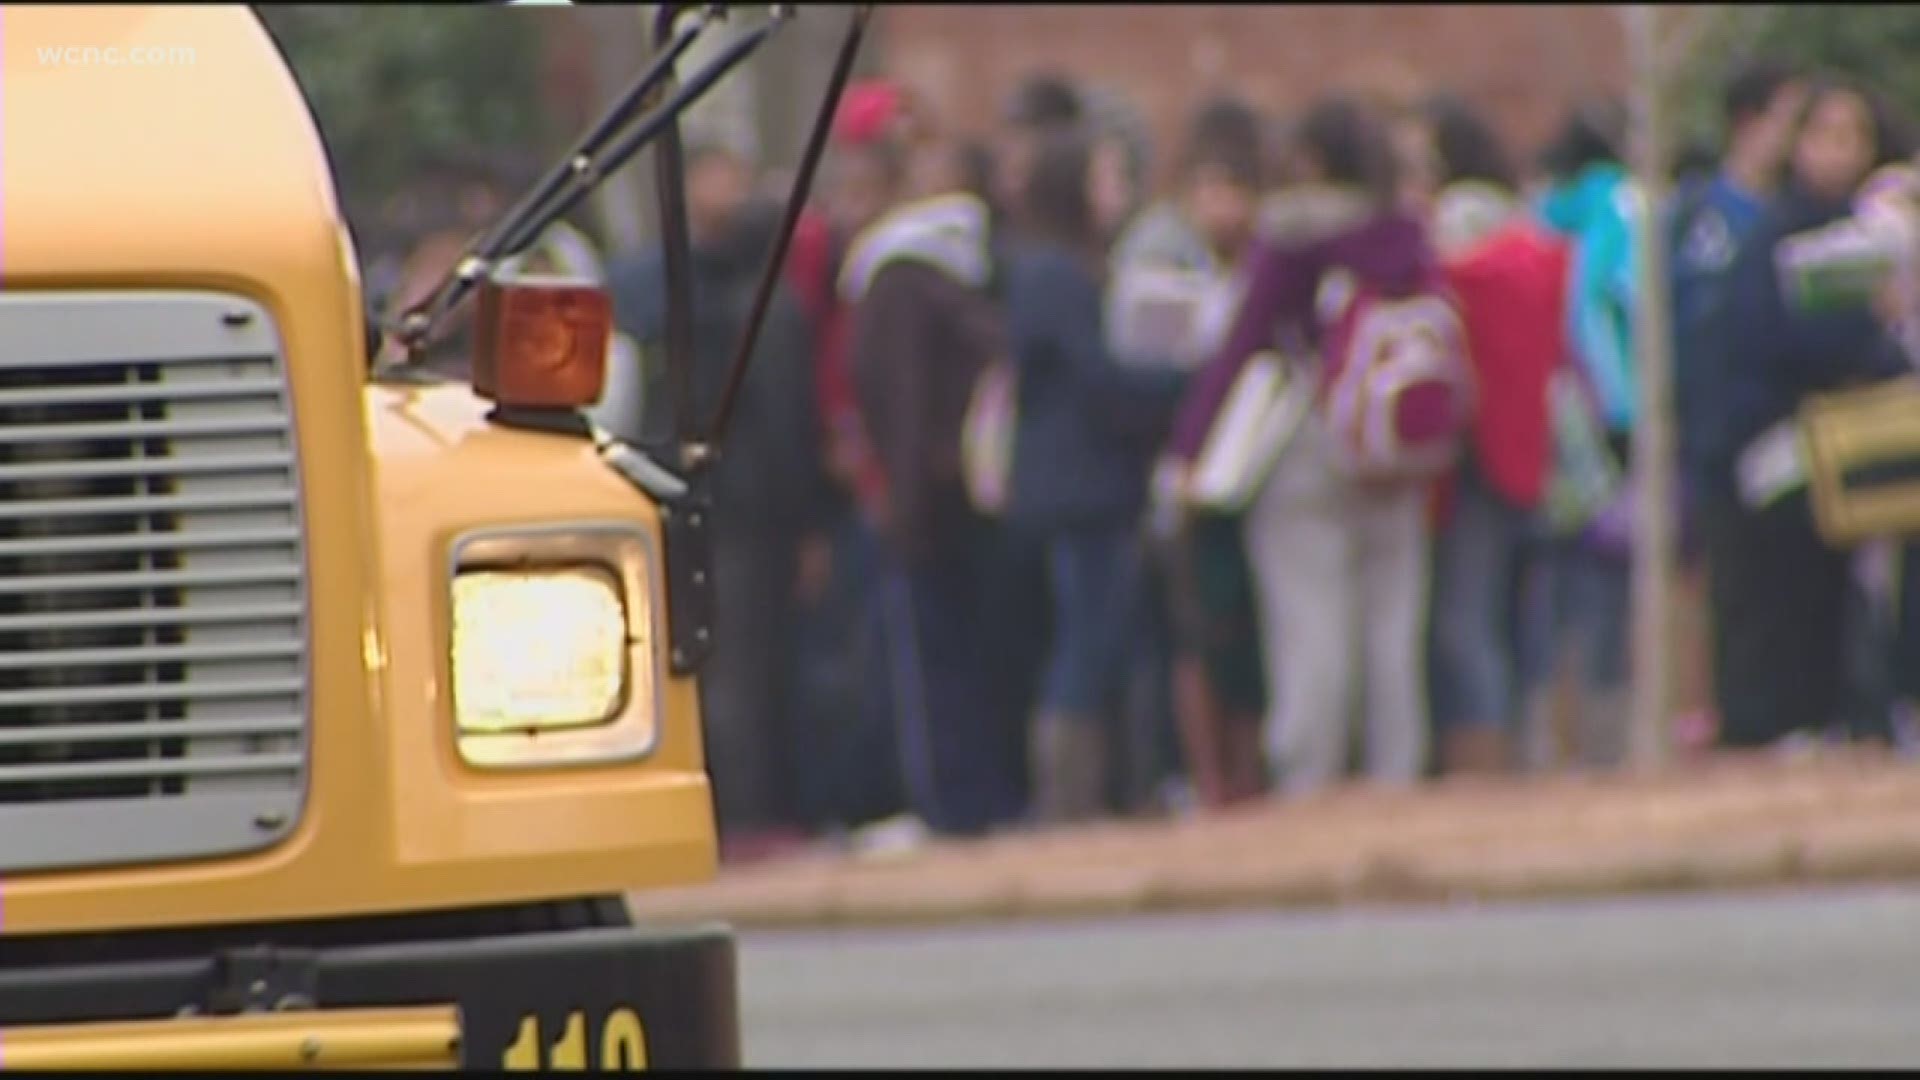 North Carolina public schools saw a decrease in crime, suspensions, and dropouts. The State board of Education just releasing new data from school districts